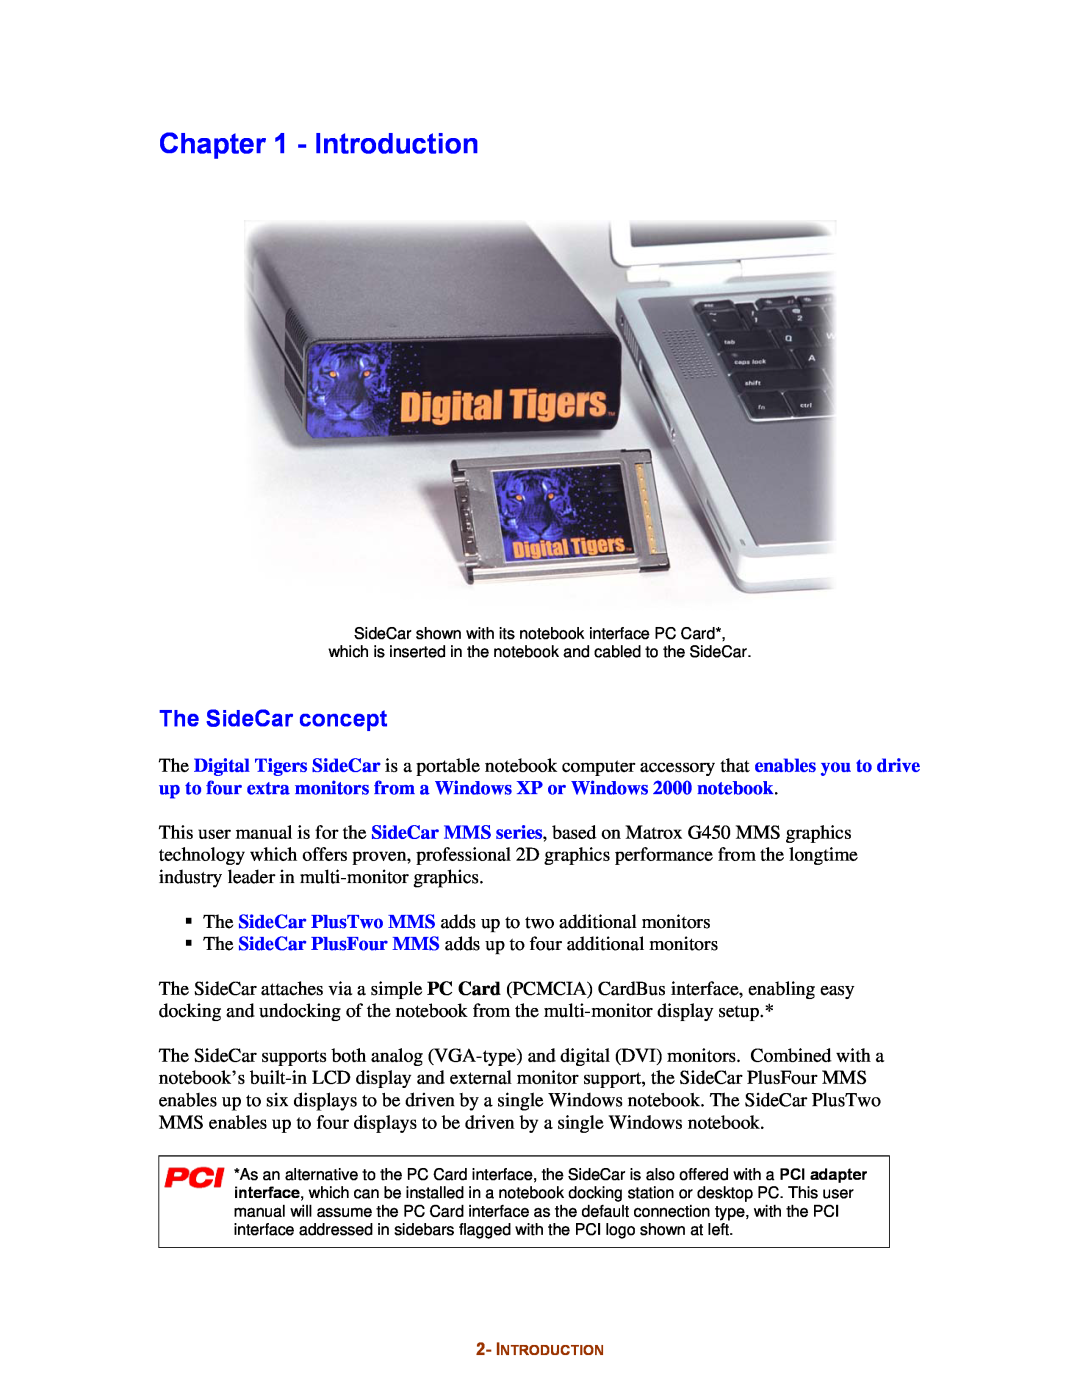 Digital Tigers SideCar MMS Series manual Introduction, The SideCar concept 